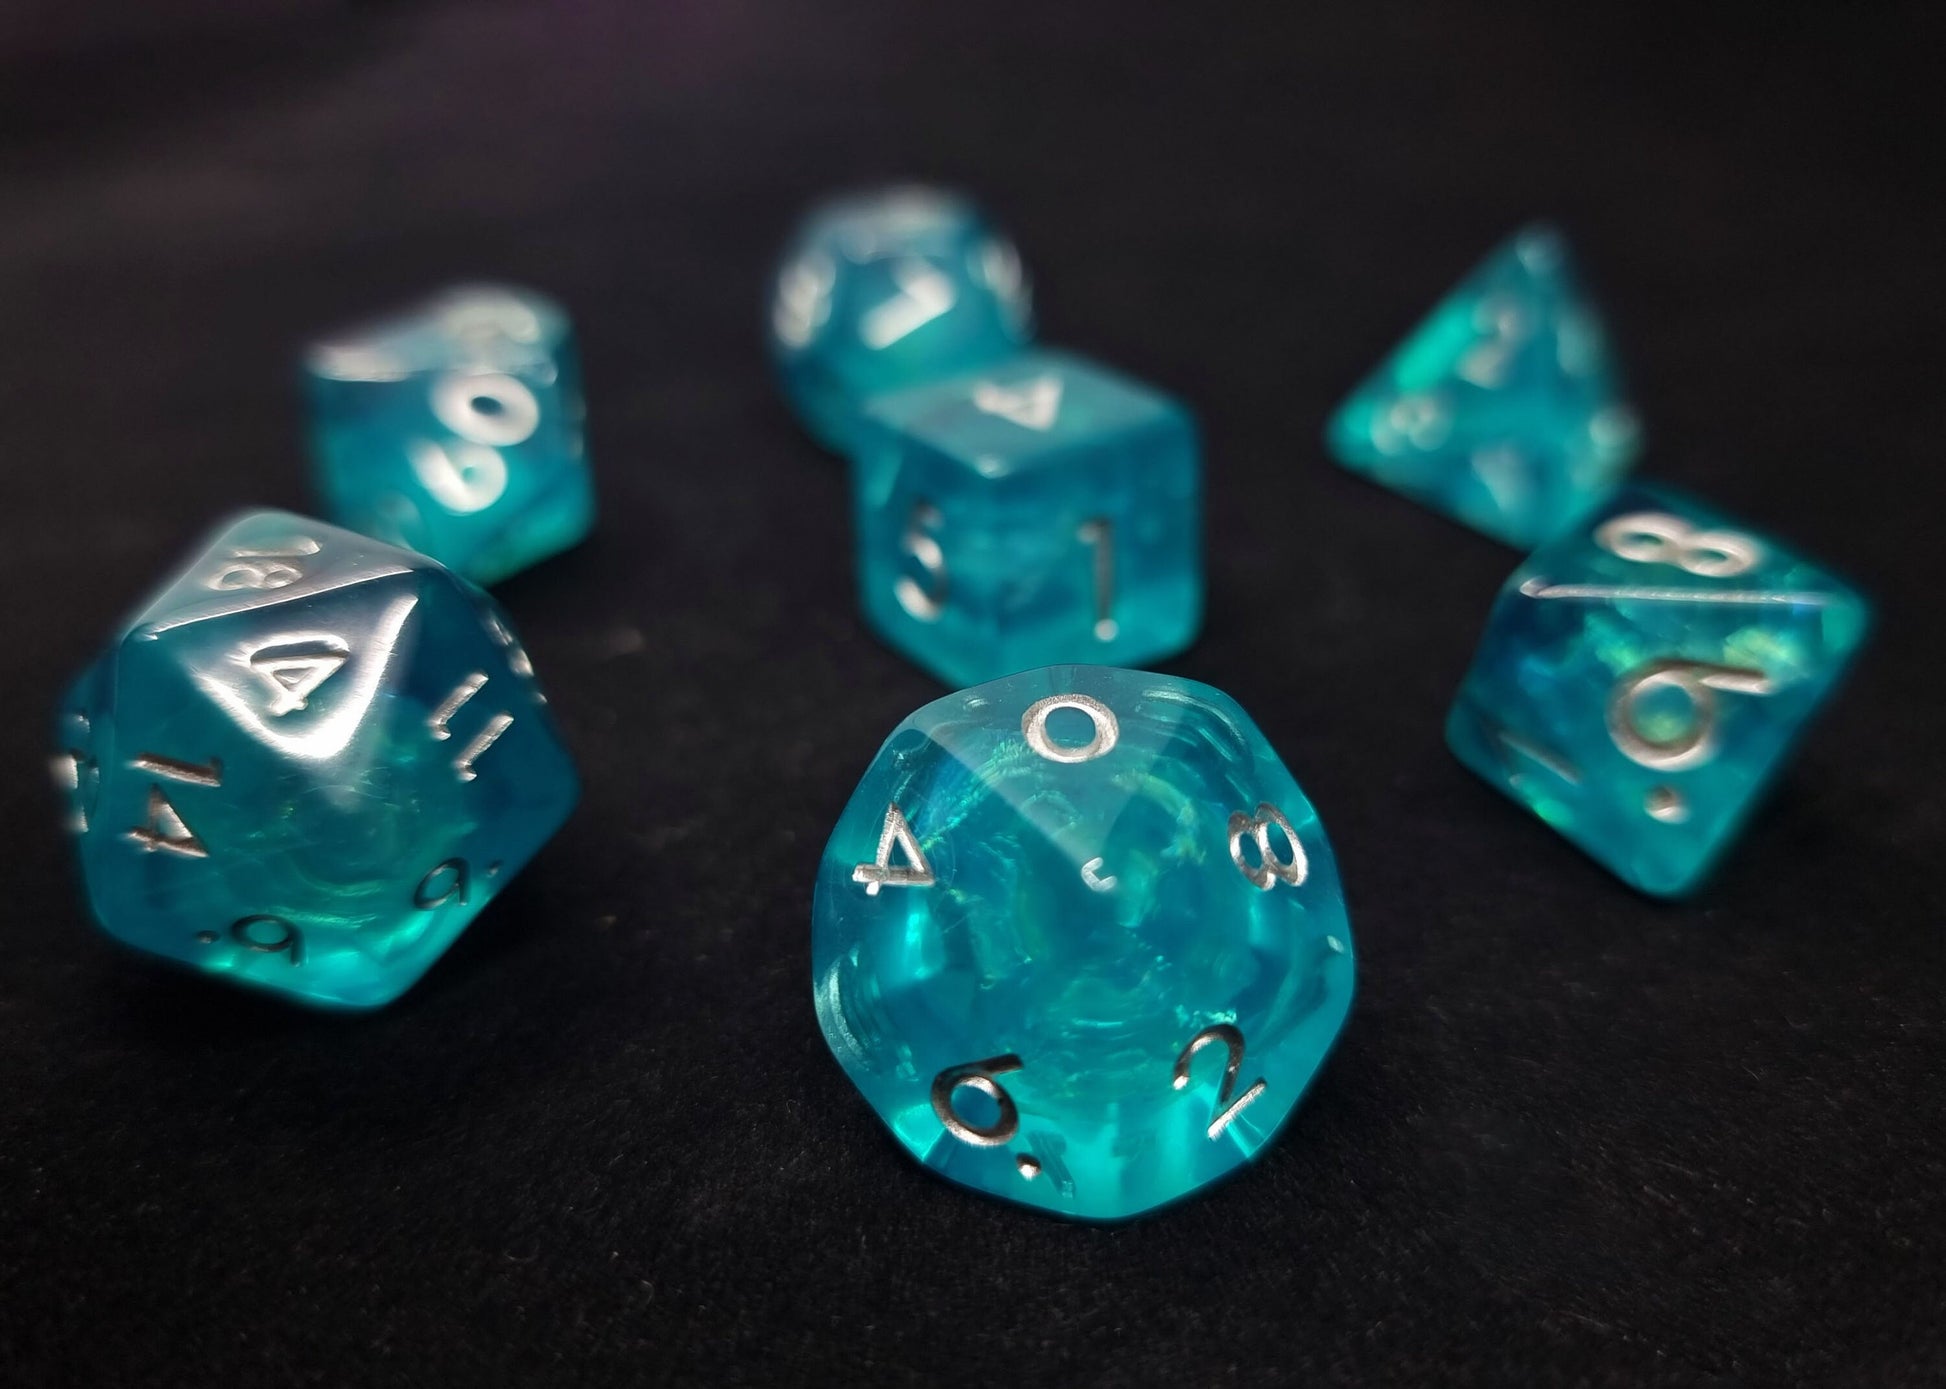 Reflection Pool Polyhedral Dice Set - Translucent Turquoise with Iridescent Foil Core